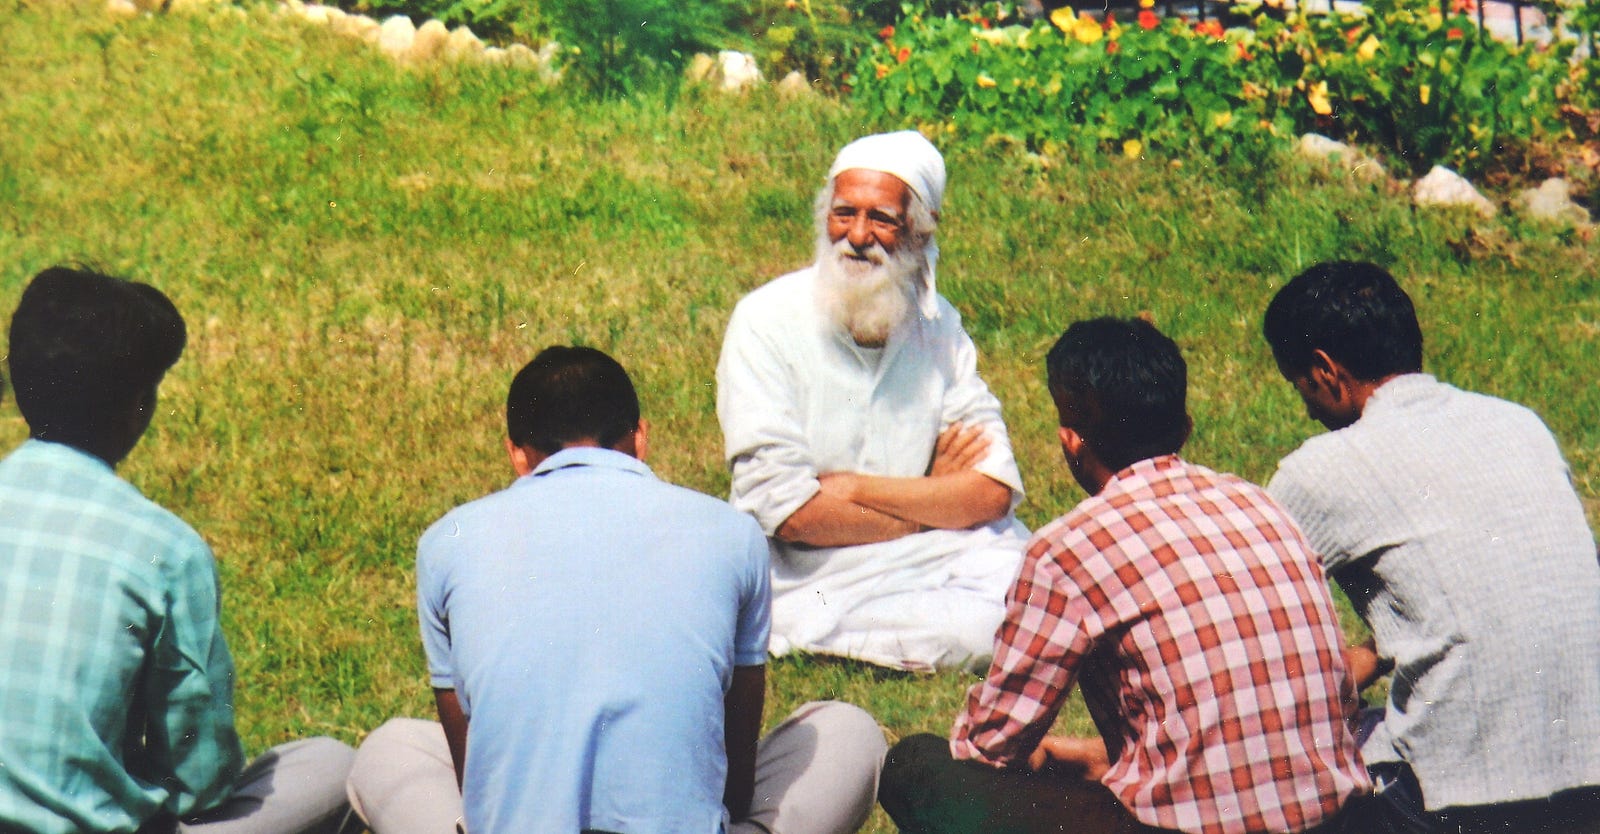 Sunderlal Bahuguna, a pivotal figure of the Chipko movement and environmental activist in India. Bahuguna passed away recently aged 94, from complications of COVID-19. Image credit: रघुबीर सिंह, CC BY-SA 4.0 <https://creativecommons.org/licenses/by-sa/4.0>, via Wikimedia Commons